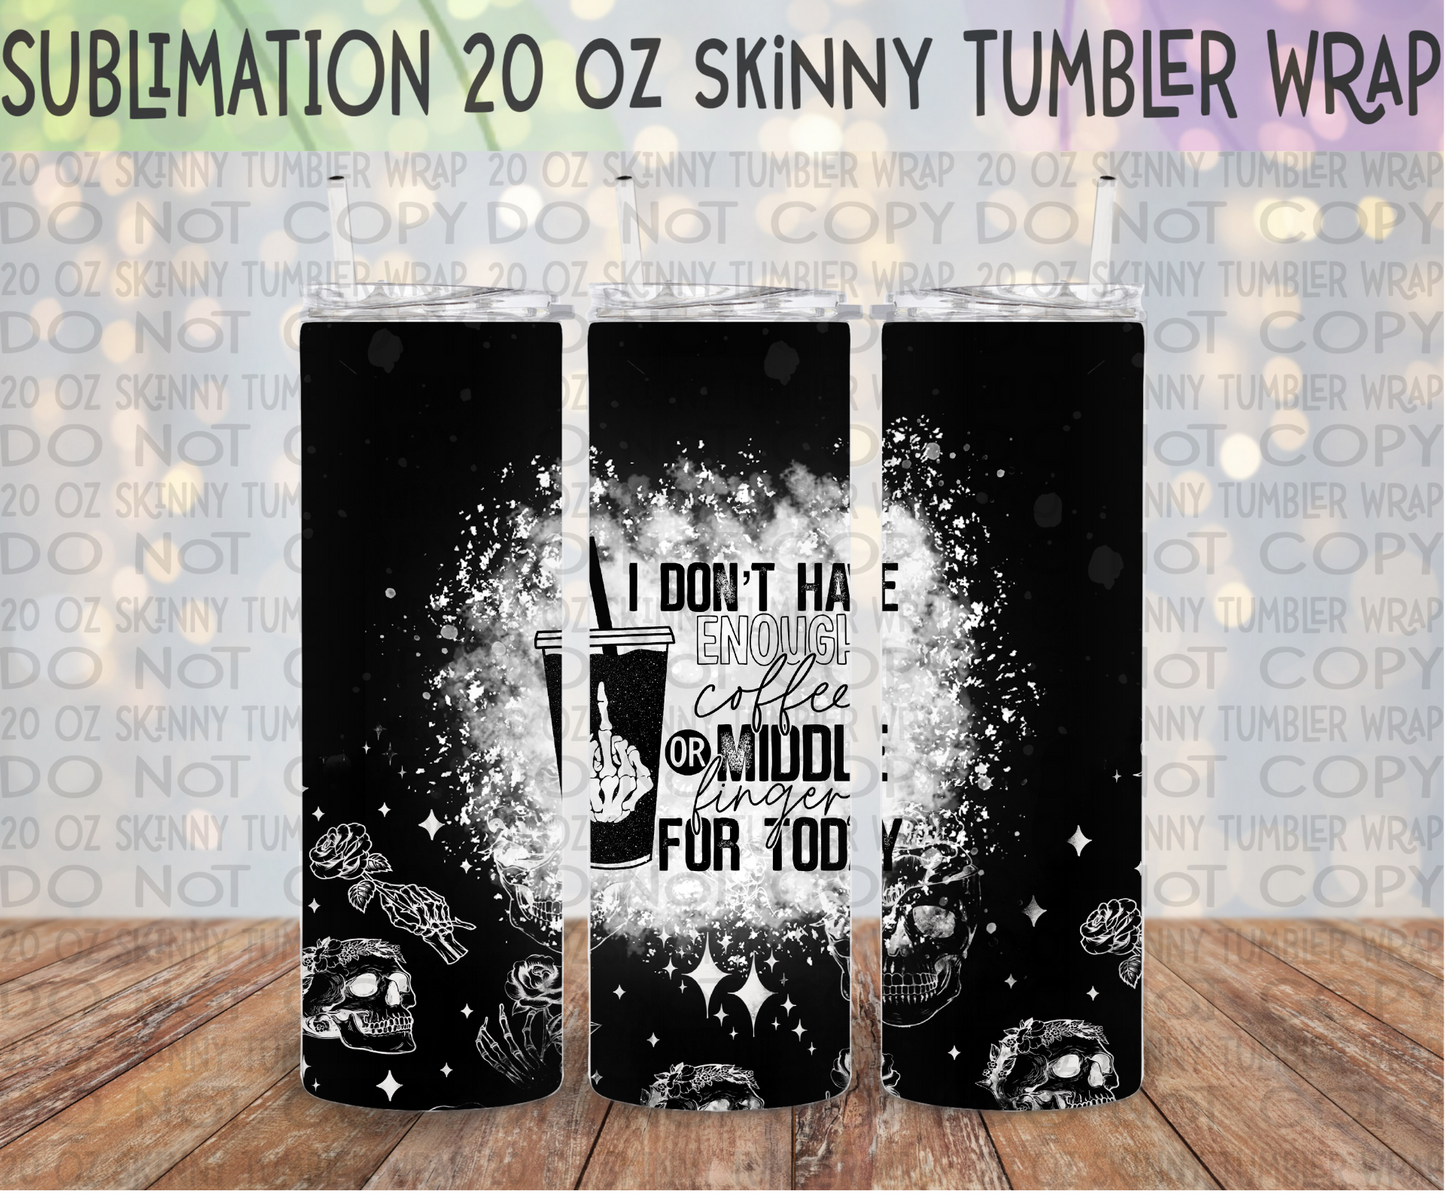 I Don't Have Enough Coffee or Middle Fingers for Today 20 Oz Skinny Tumbler Wrap - Sublimation Transfer - RTS